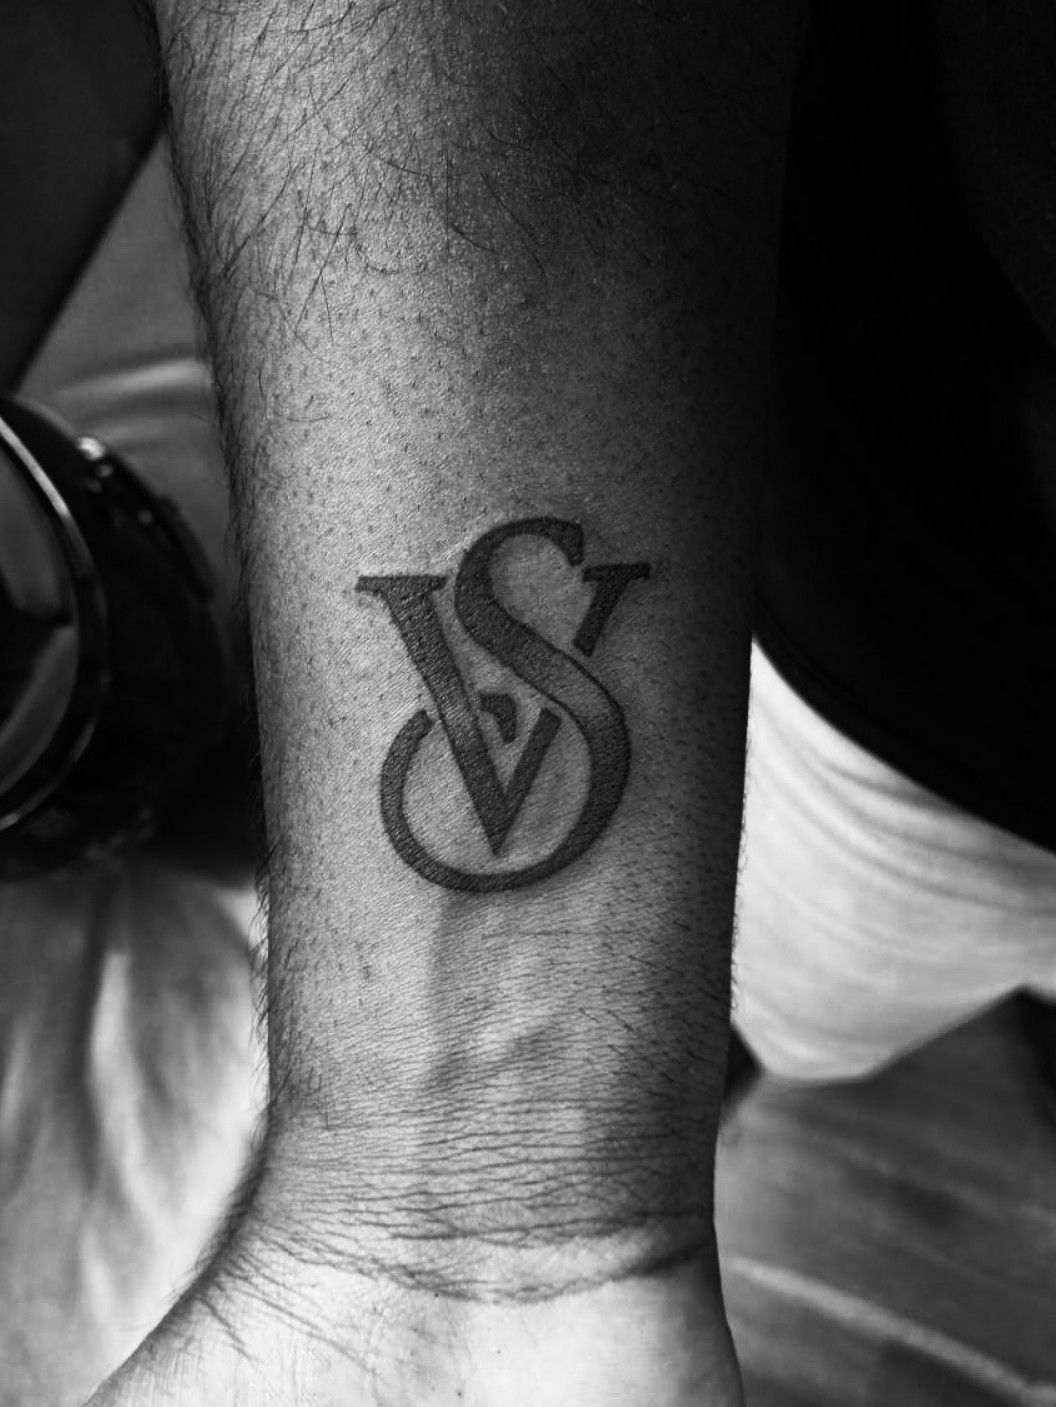 Tattoo uploaded by Vipul Chaudhary  Sv Font tattoo  Sv logo  Sv logo  tattoo  Sv tattoo design  Tattoodo